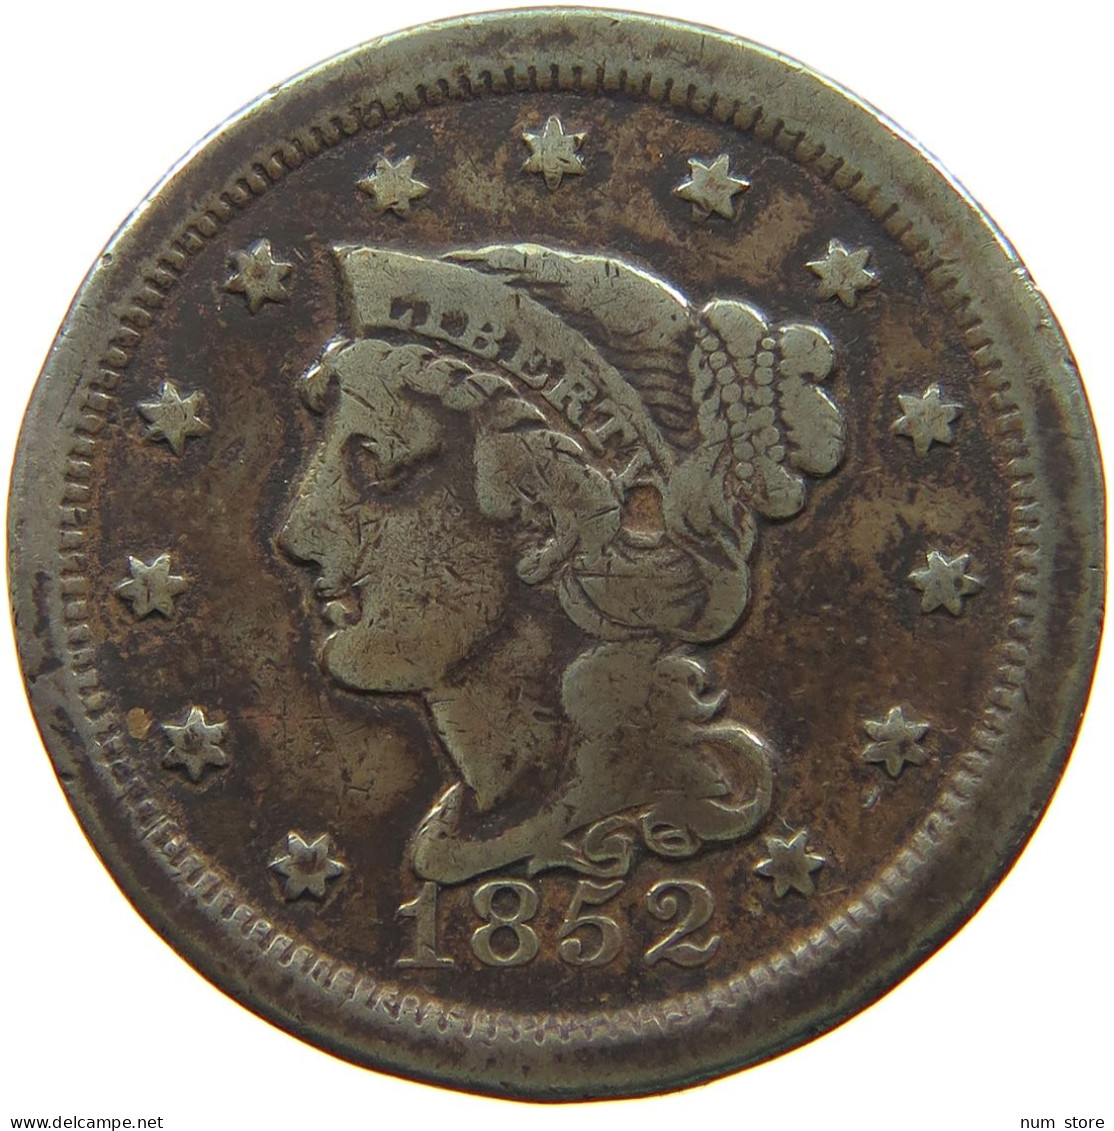 UNITED STATES OF AMERICA LARGE CENT 185 BRAIDED HAIR #t141 0297 - 1840-1857: Braided Hair (Cheveux Tressés)